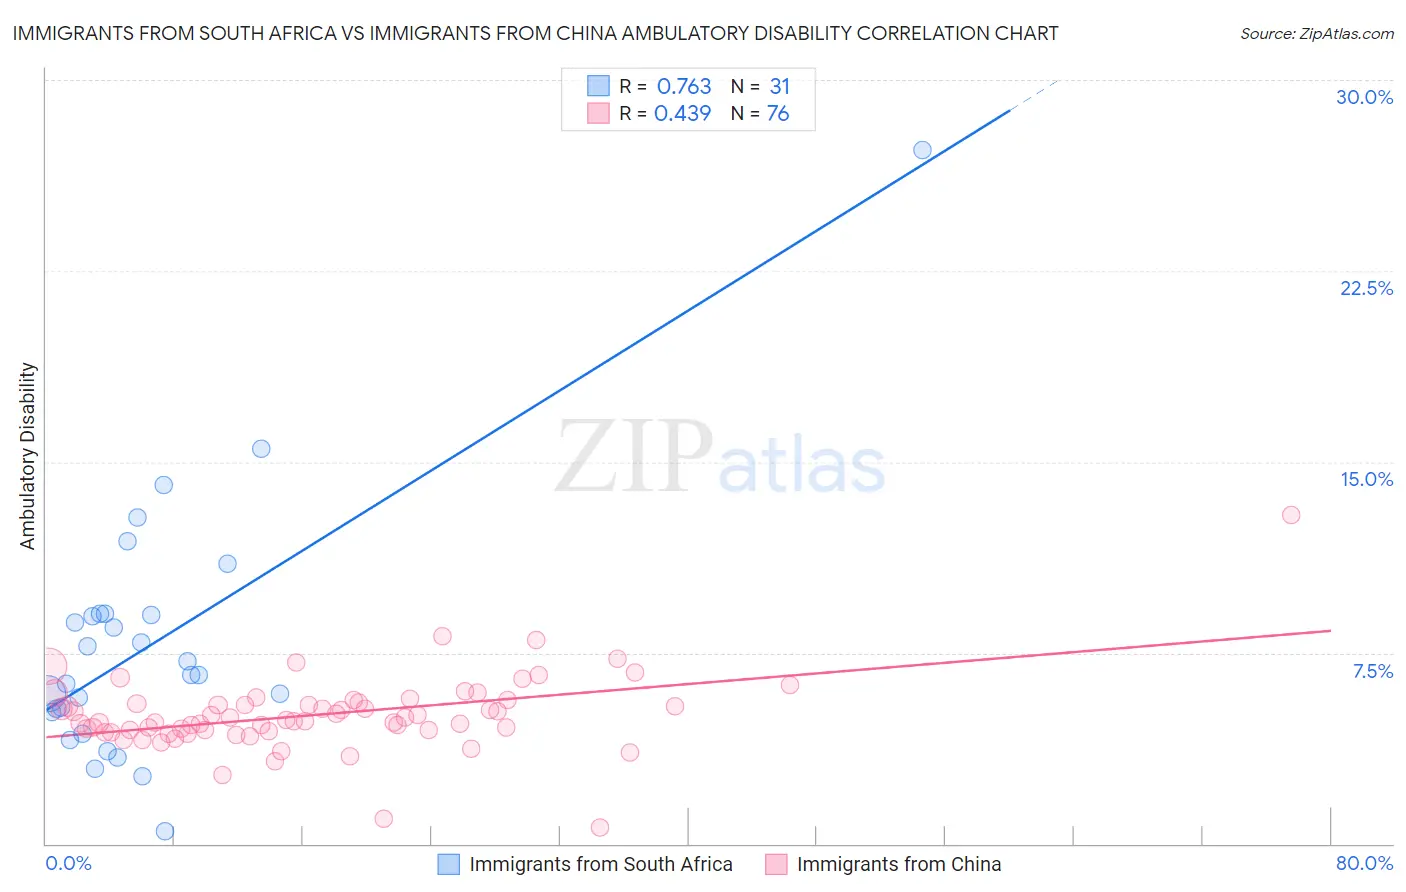 Immigrants from South Africa vs Immigrants from China Ambulatory Disability